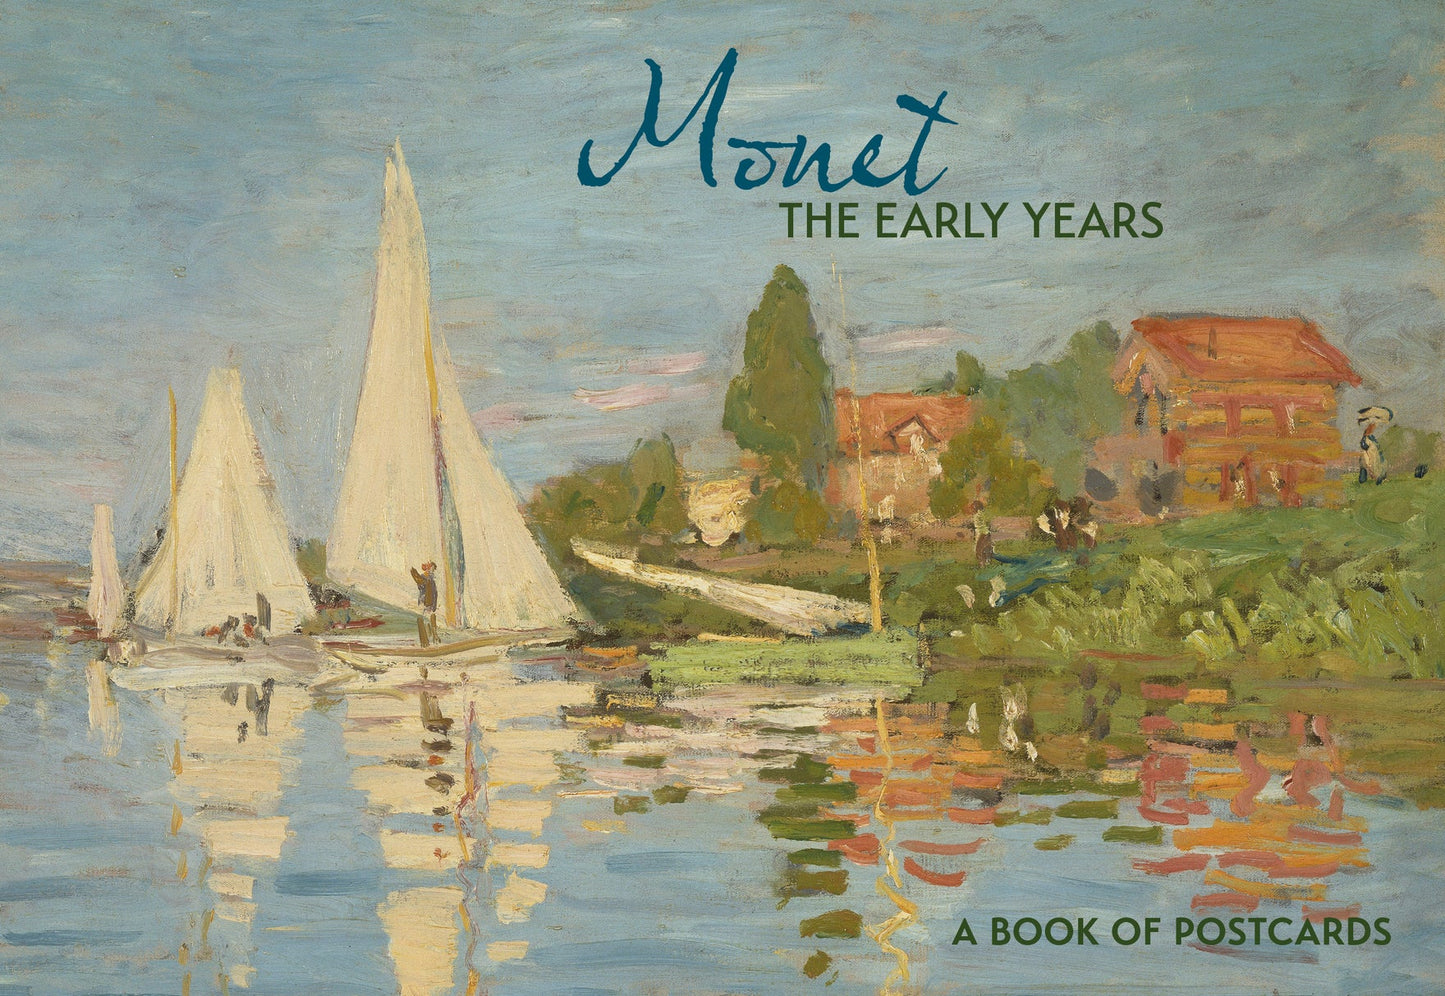 Monet: The Early Years Book of Postcards